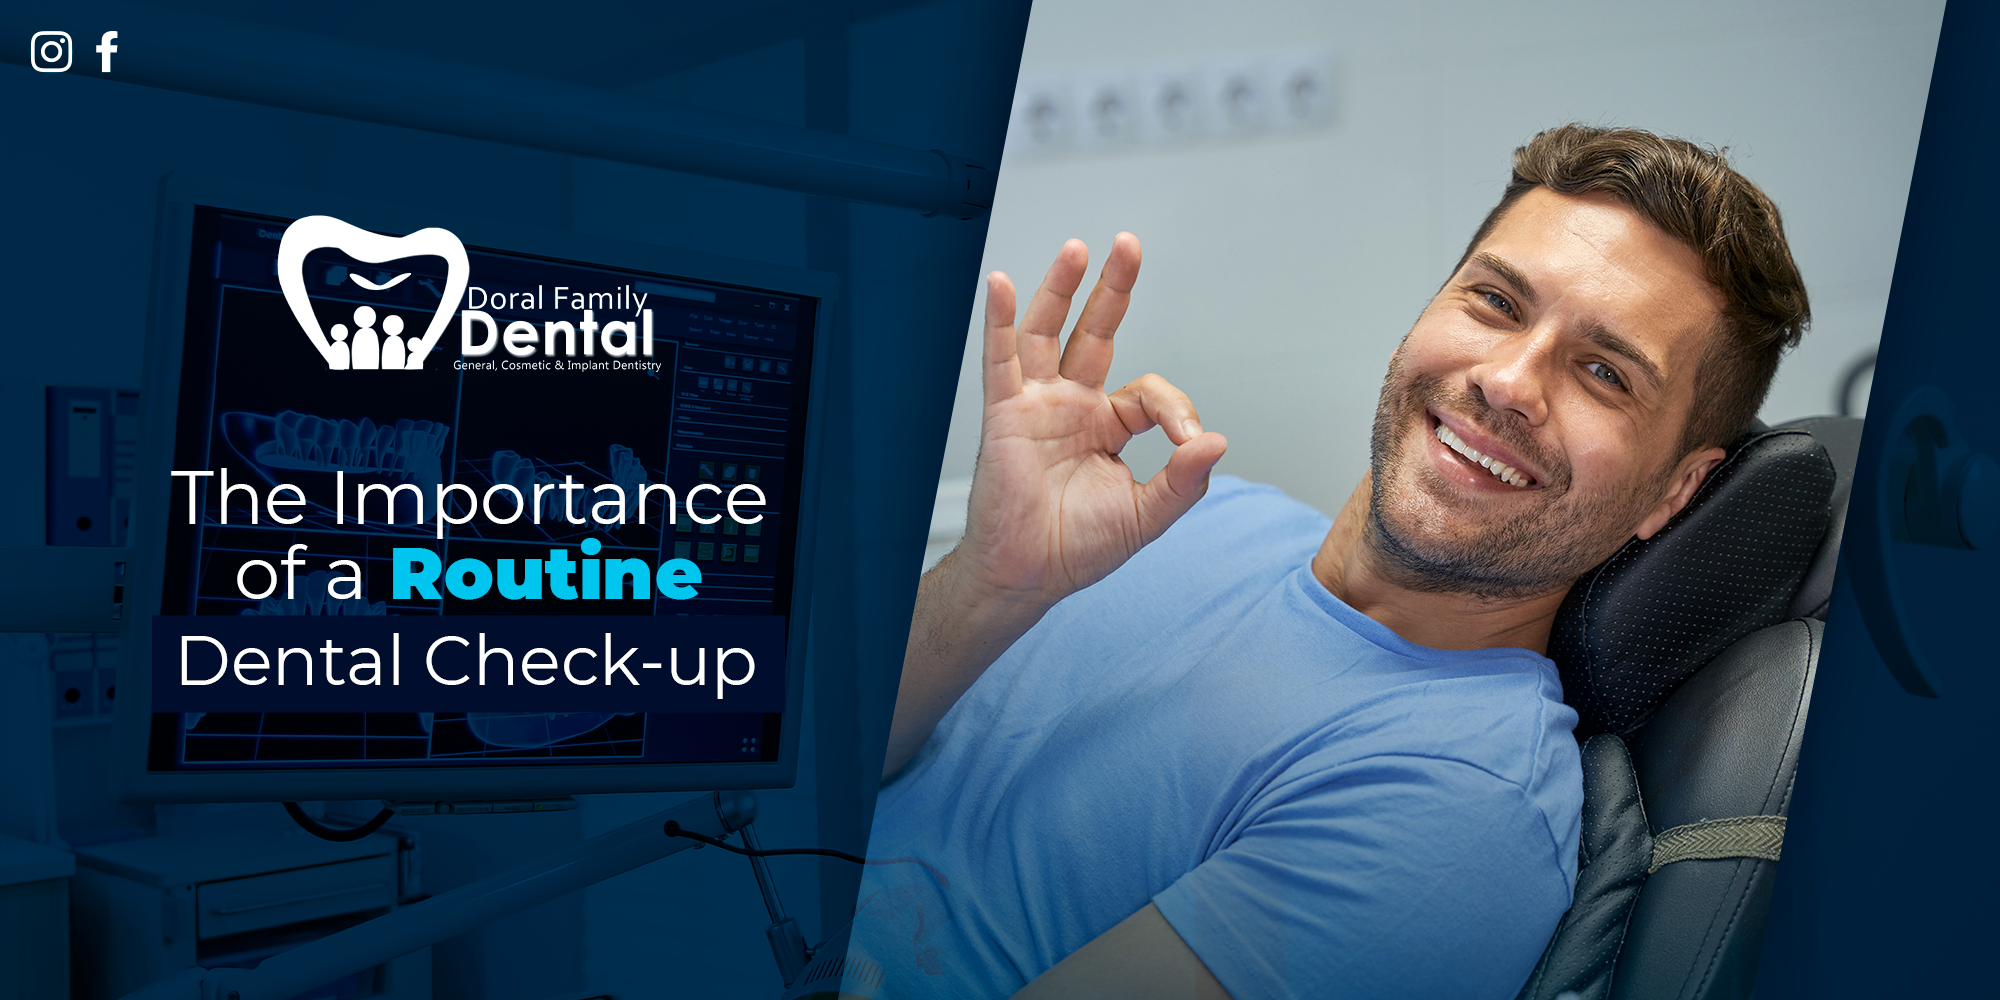 The Importance of a Routine Dental Check-up